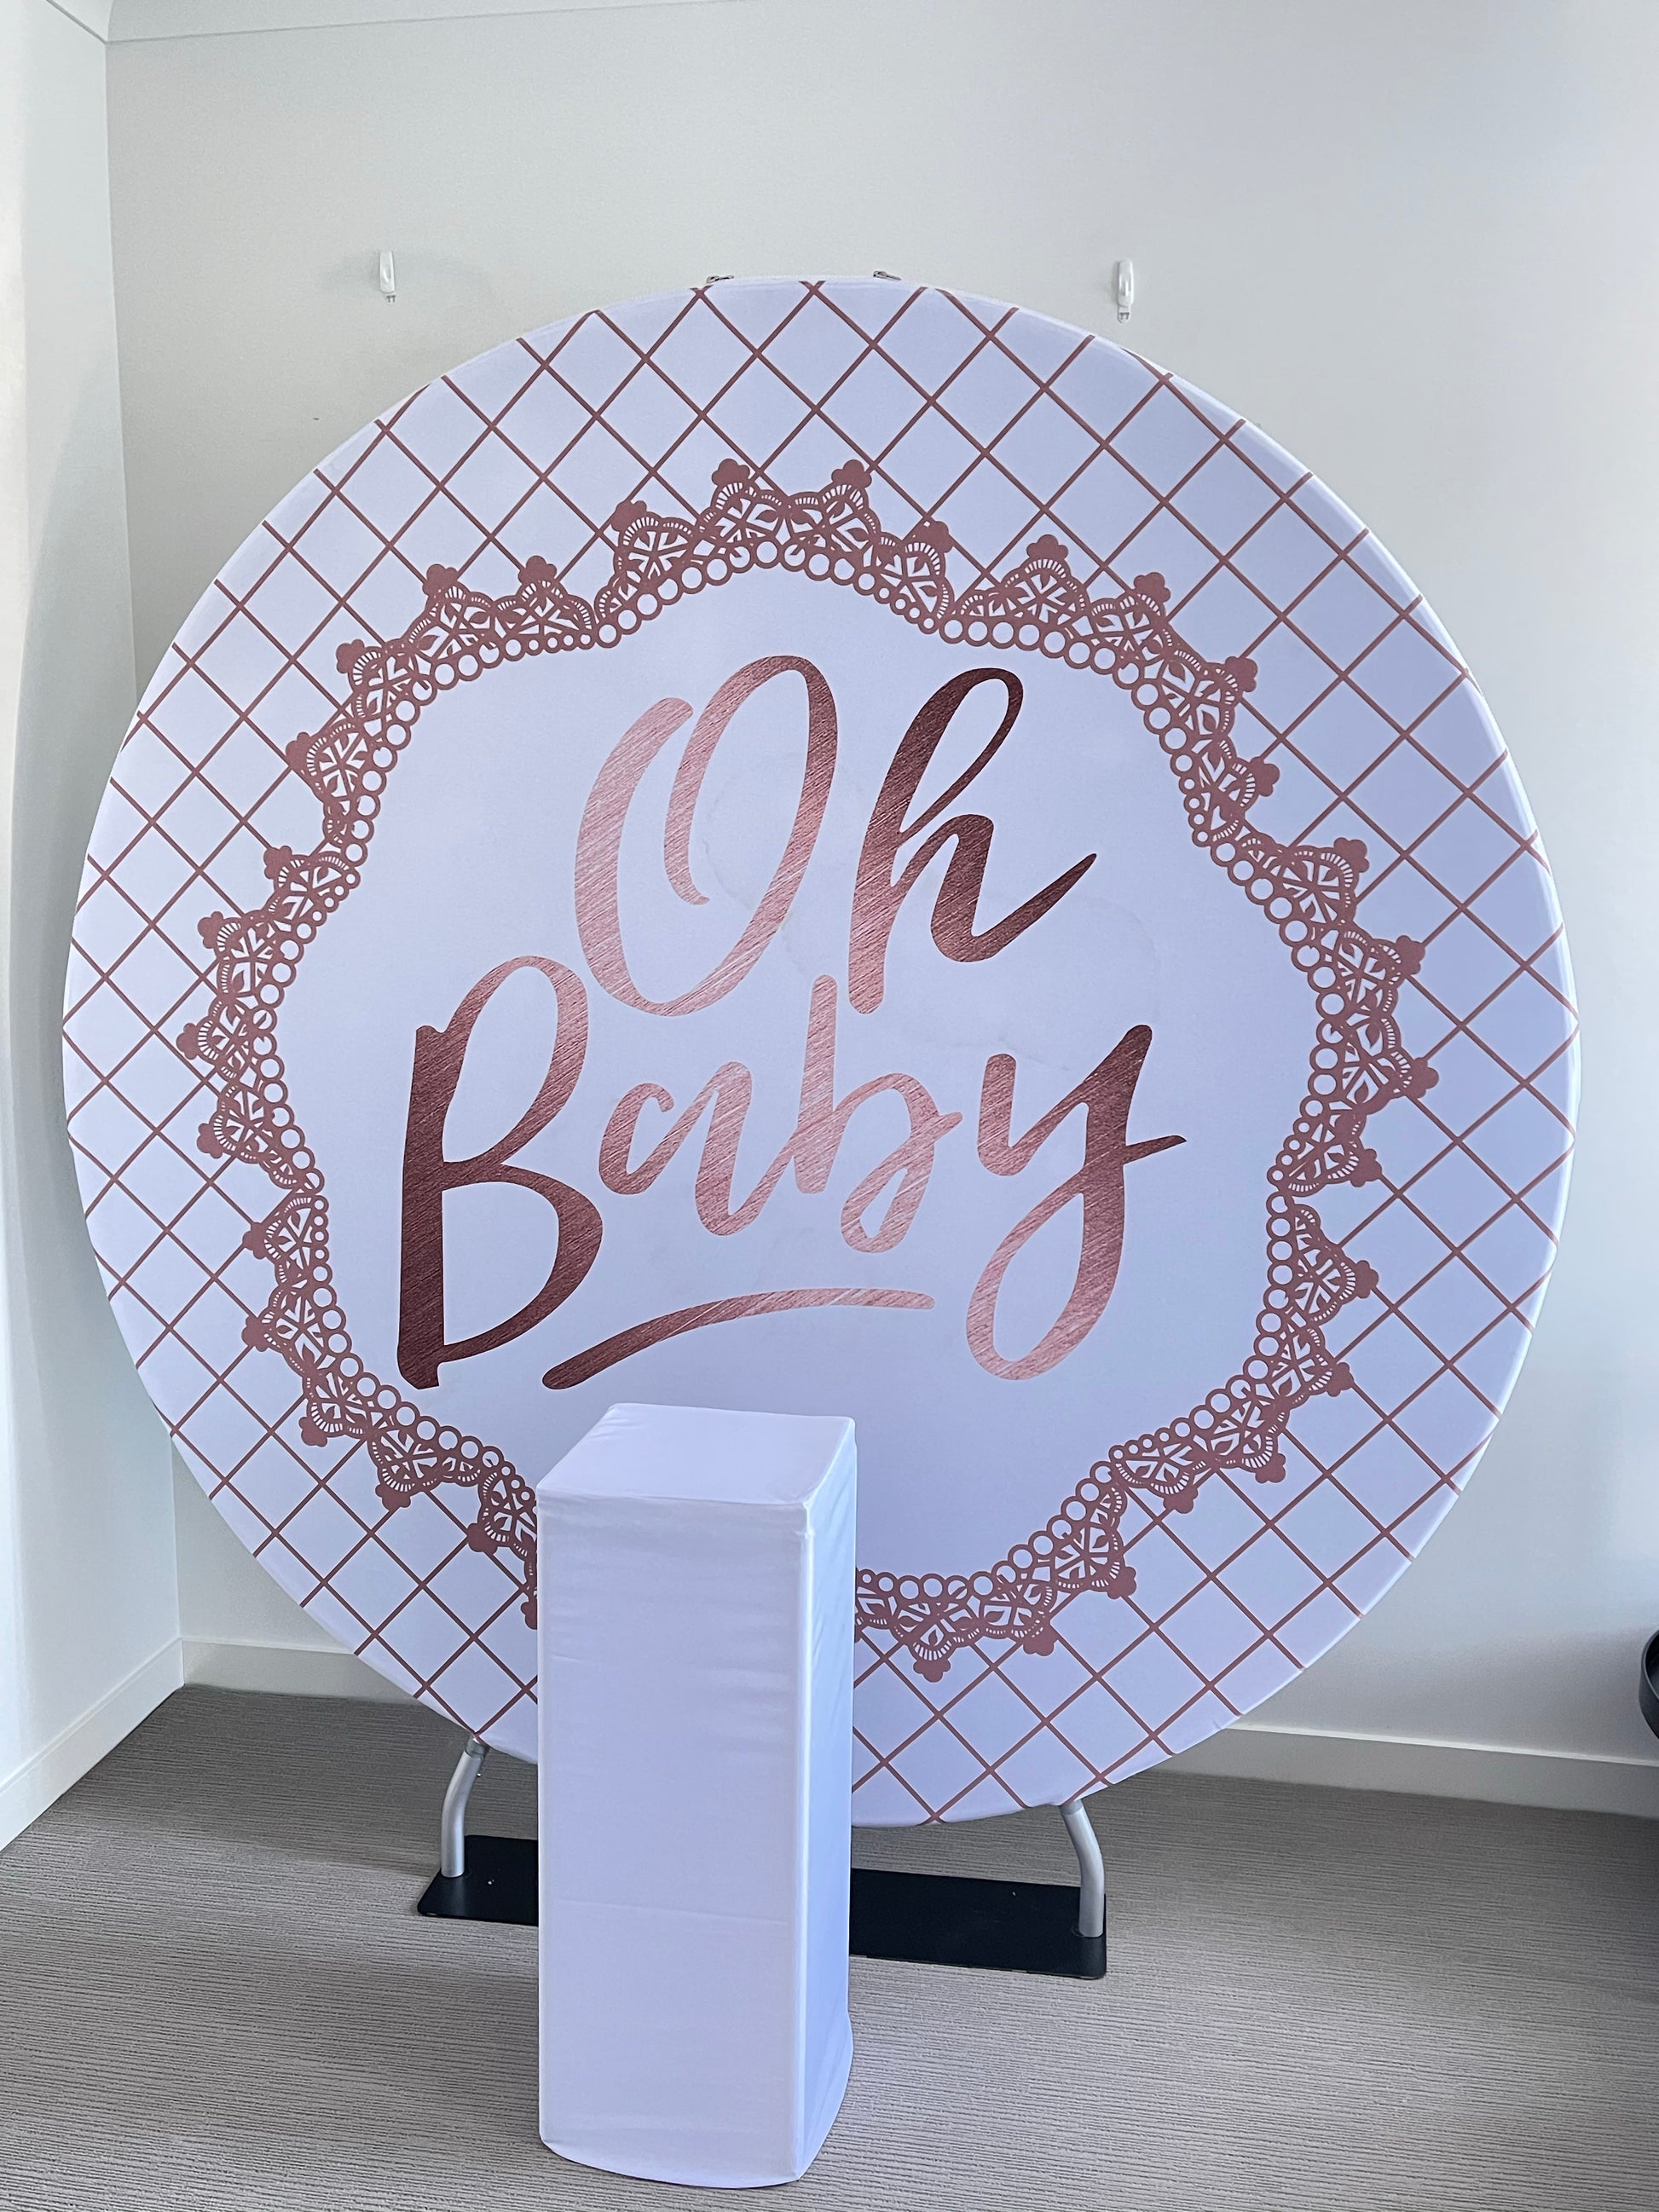 OH BABY BACKDROP HIRE - Live Shopping Tours